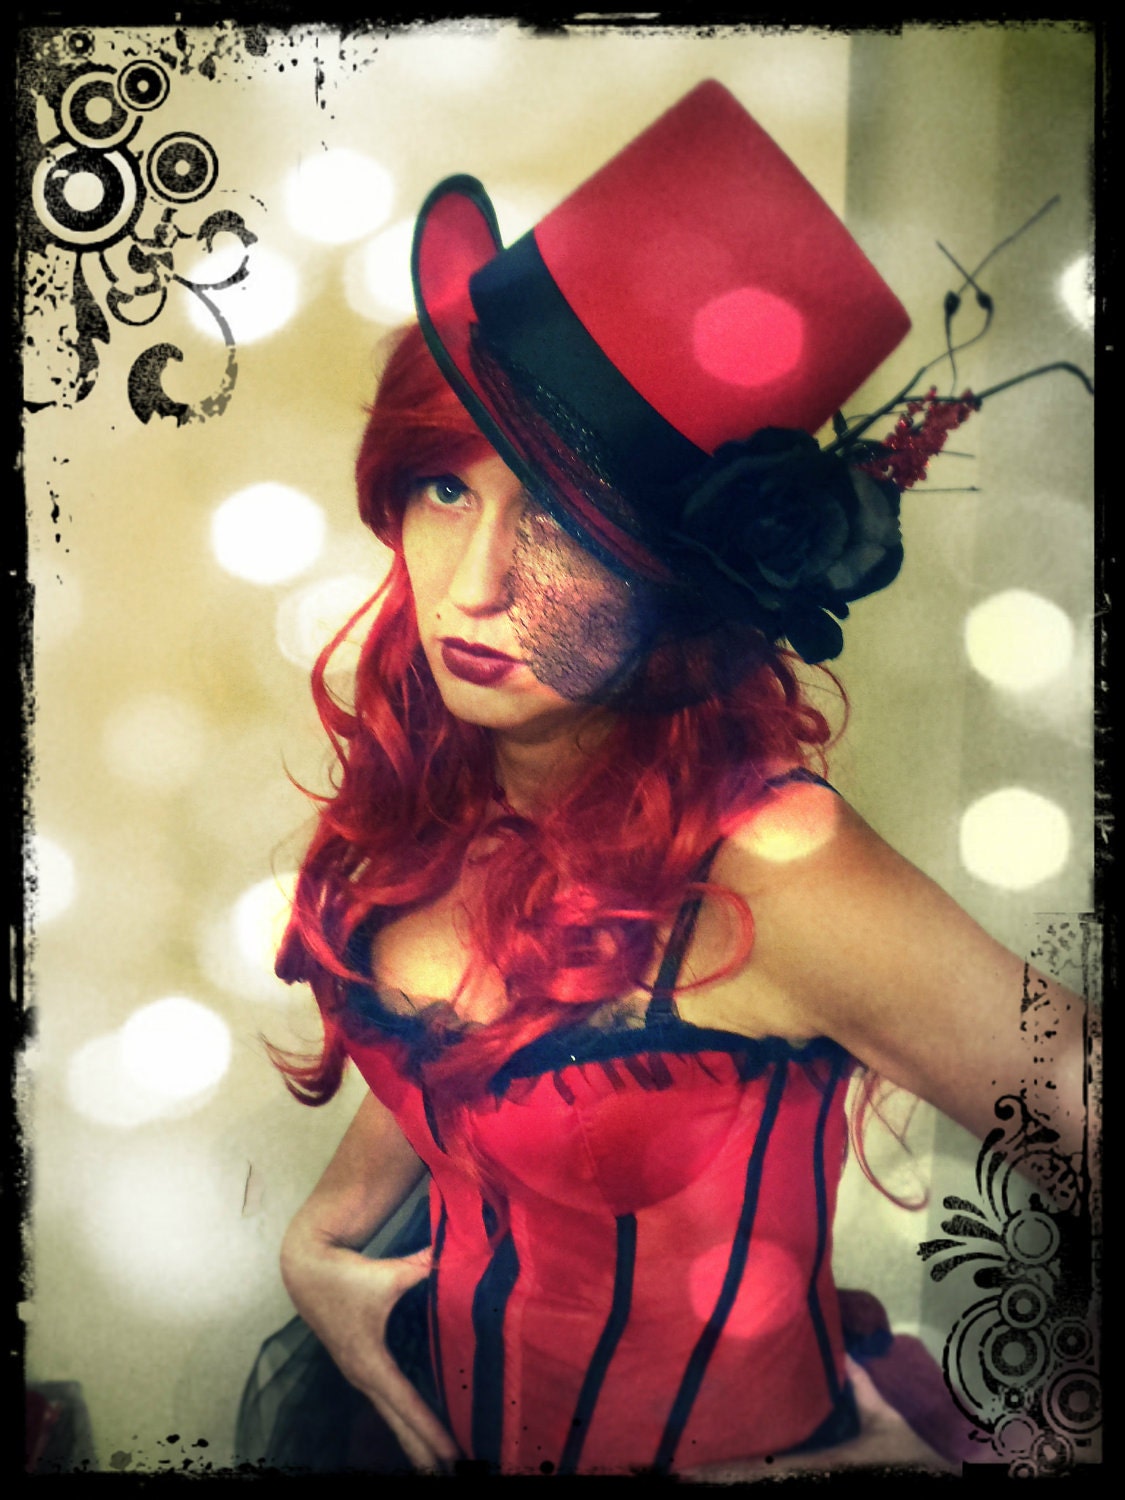 Valentines Day Moulin Rouge-style Red and Black Burlesque Corset and Victorian Bustle Skirt